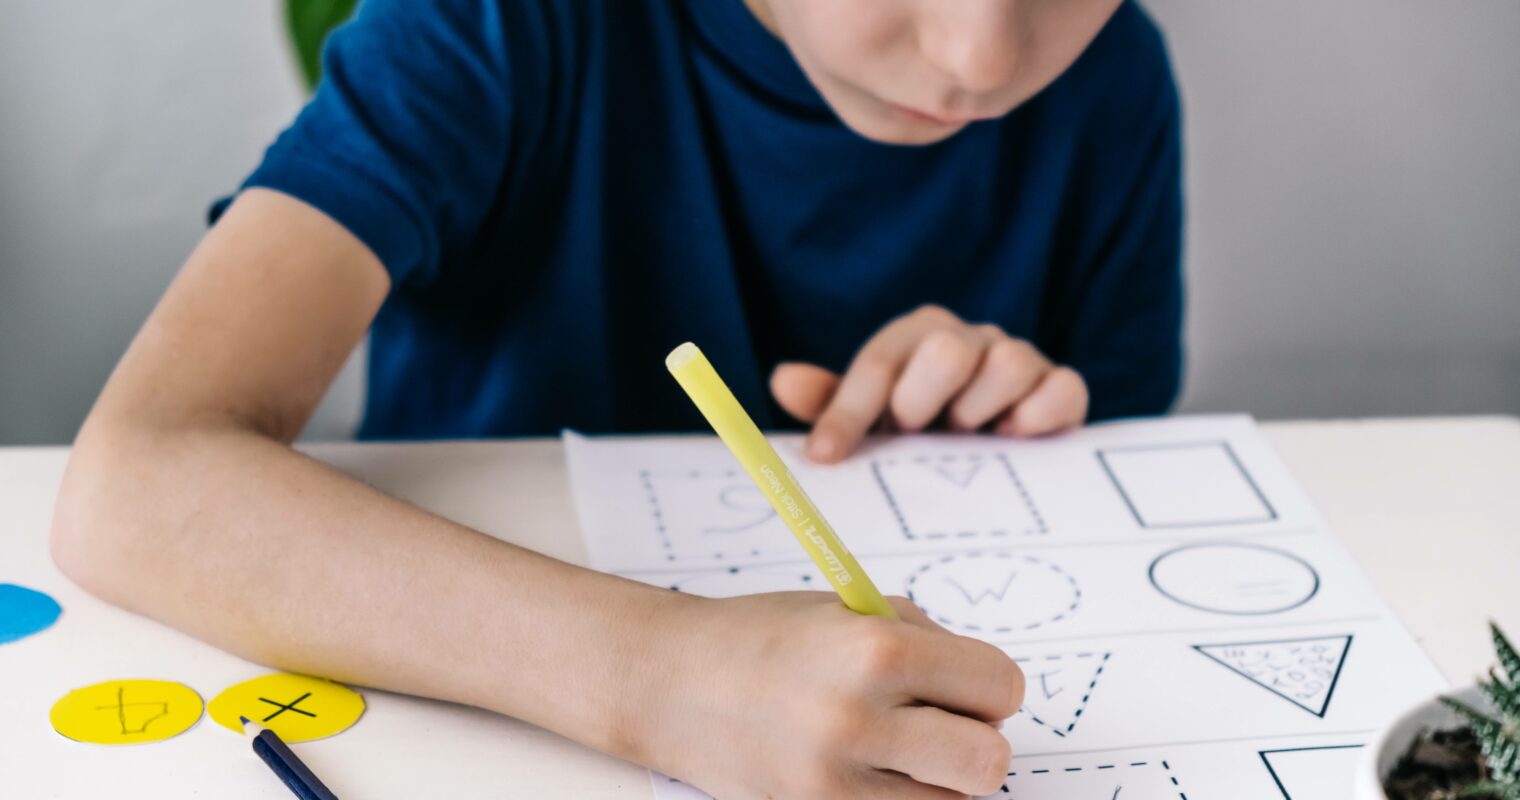 A student writing on a worksheet at a desk.